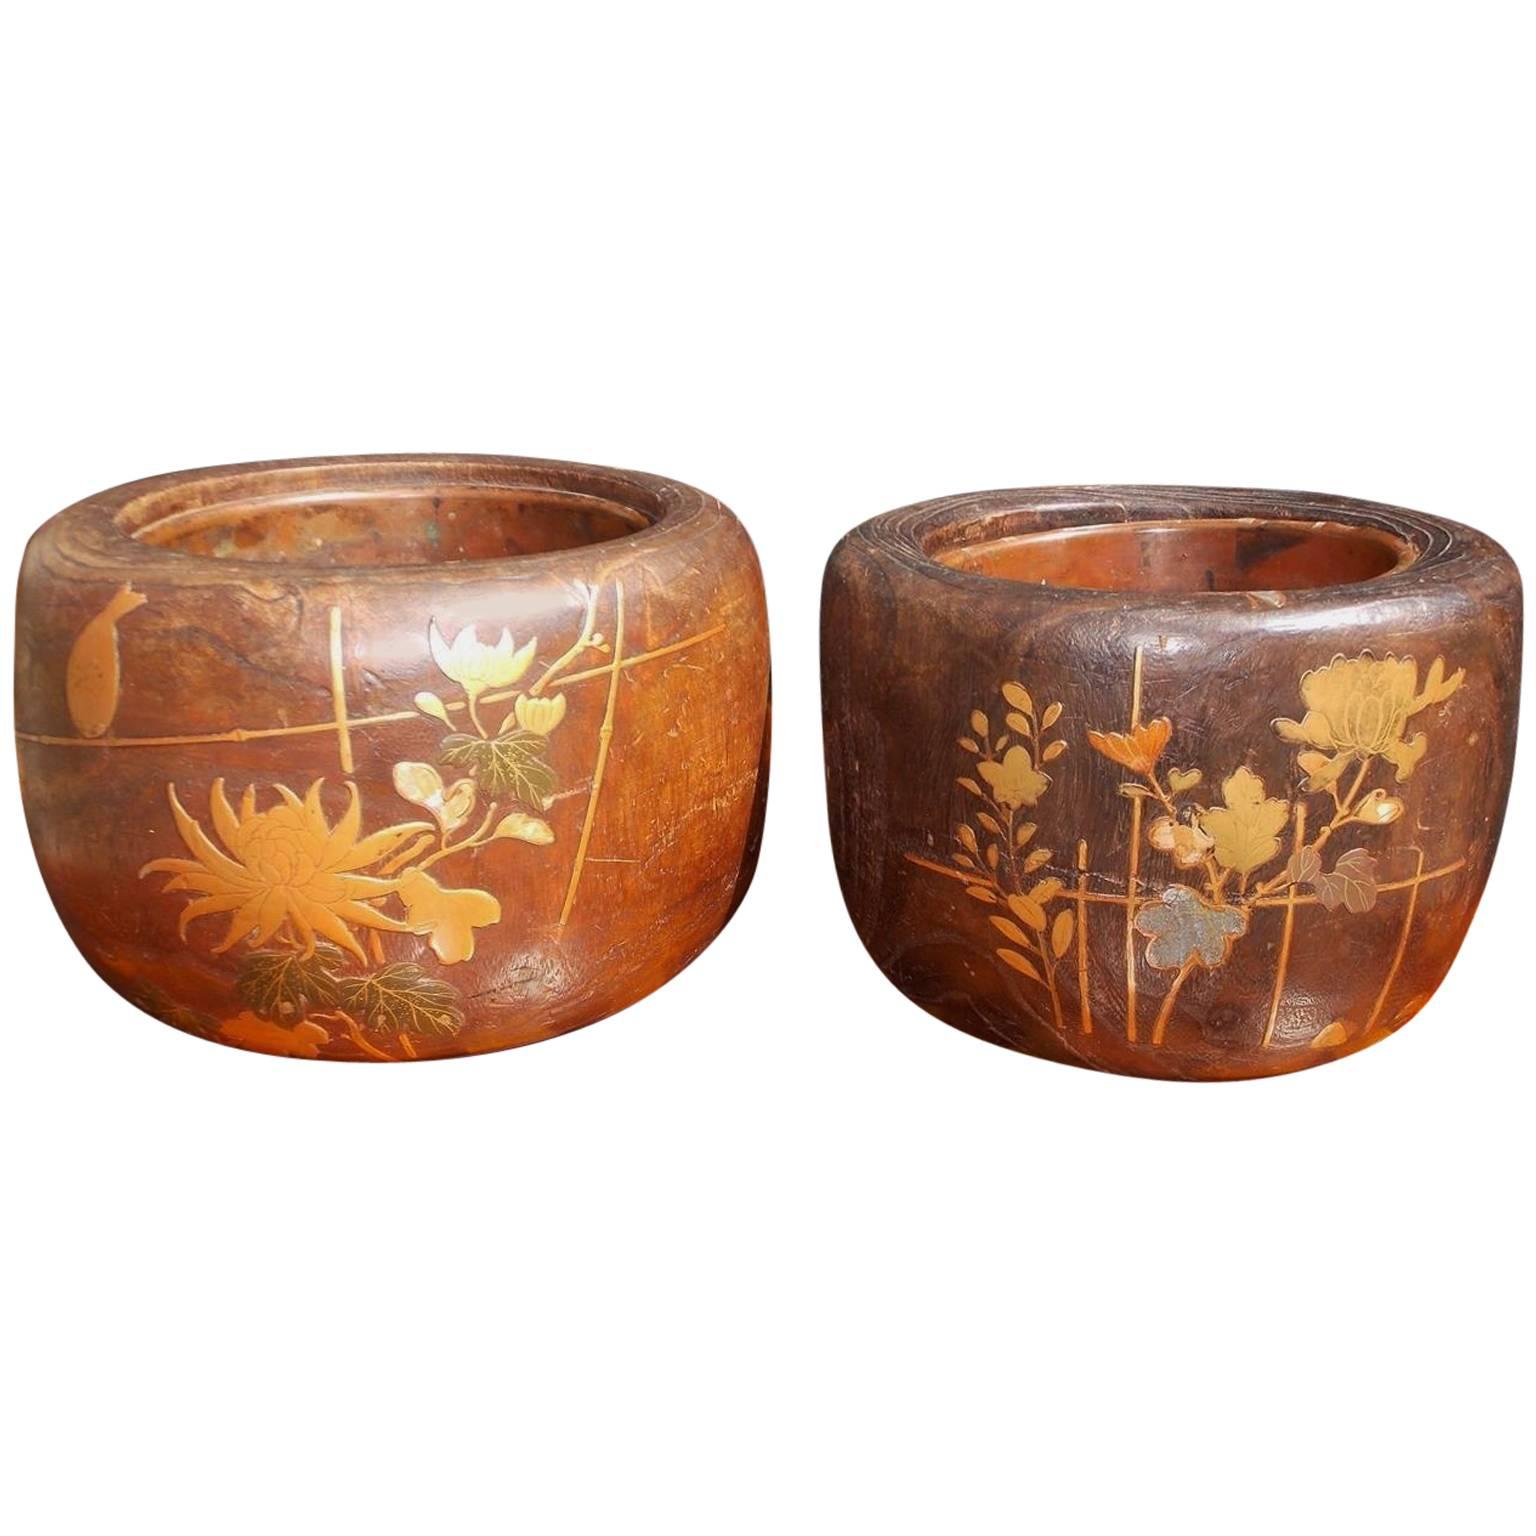 Pair of Japanese Wood and Copper Lined Inlaid Braziers, Circa 1870